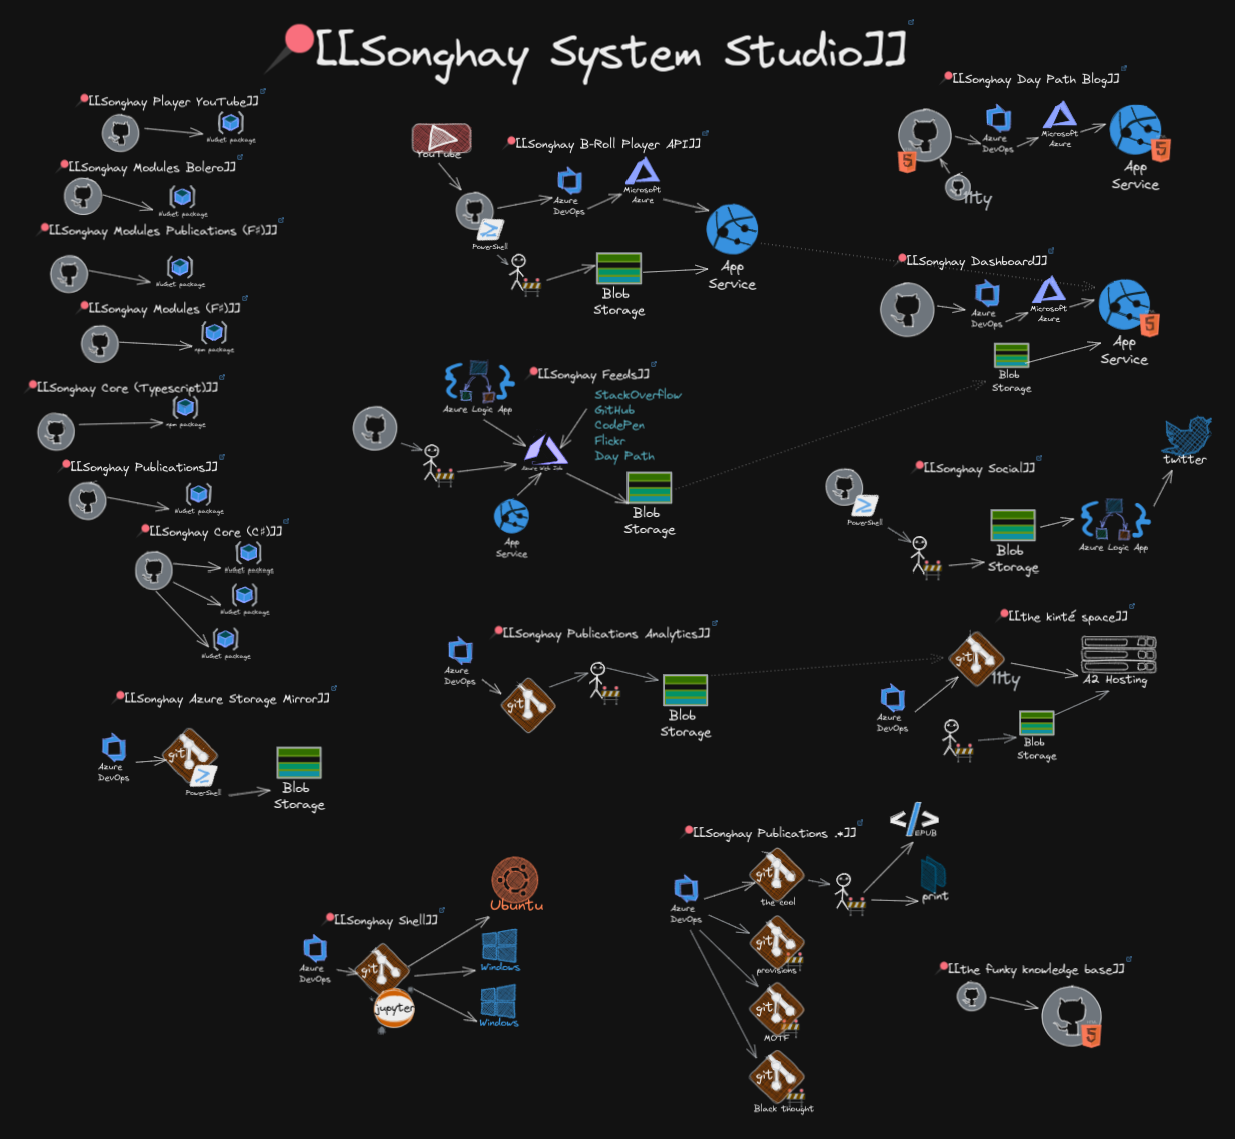 Excalidraw drawing of the Songhay System